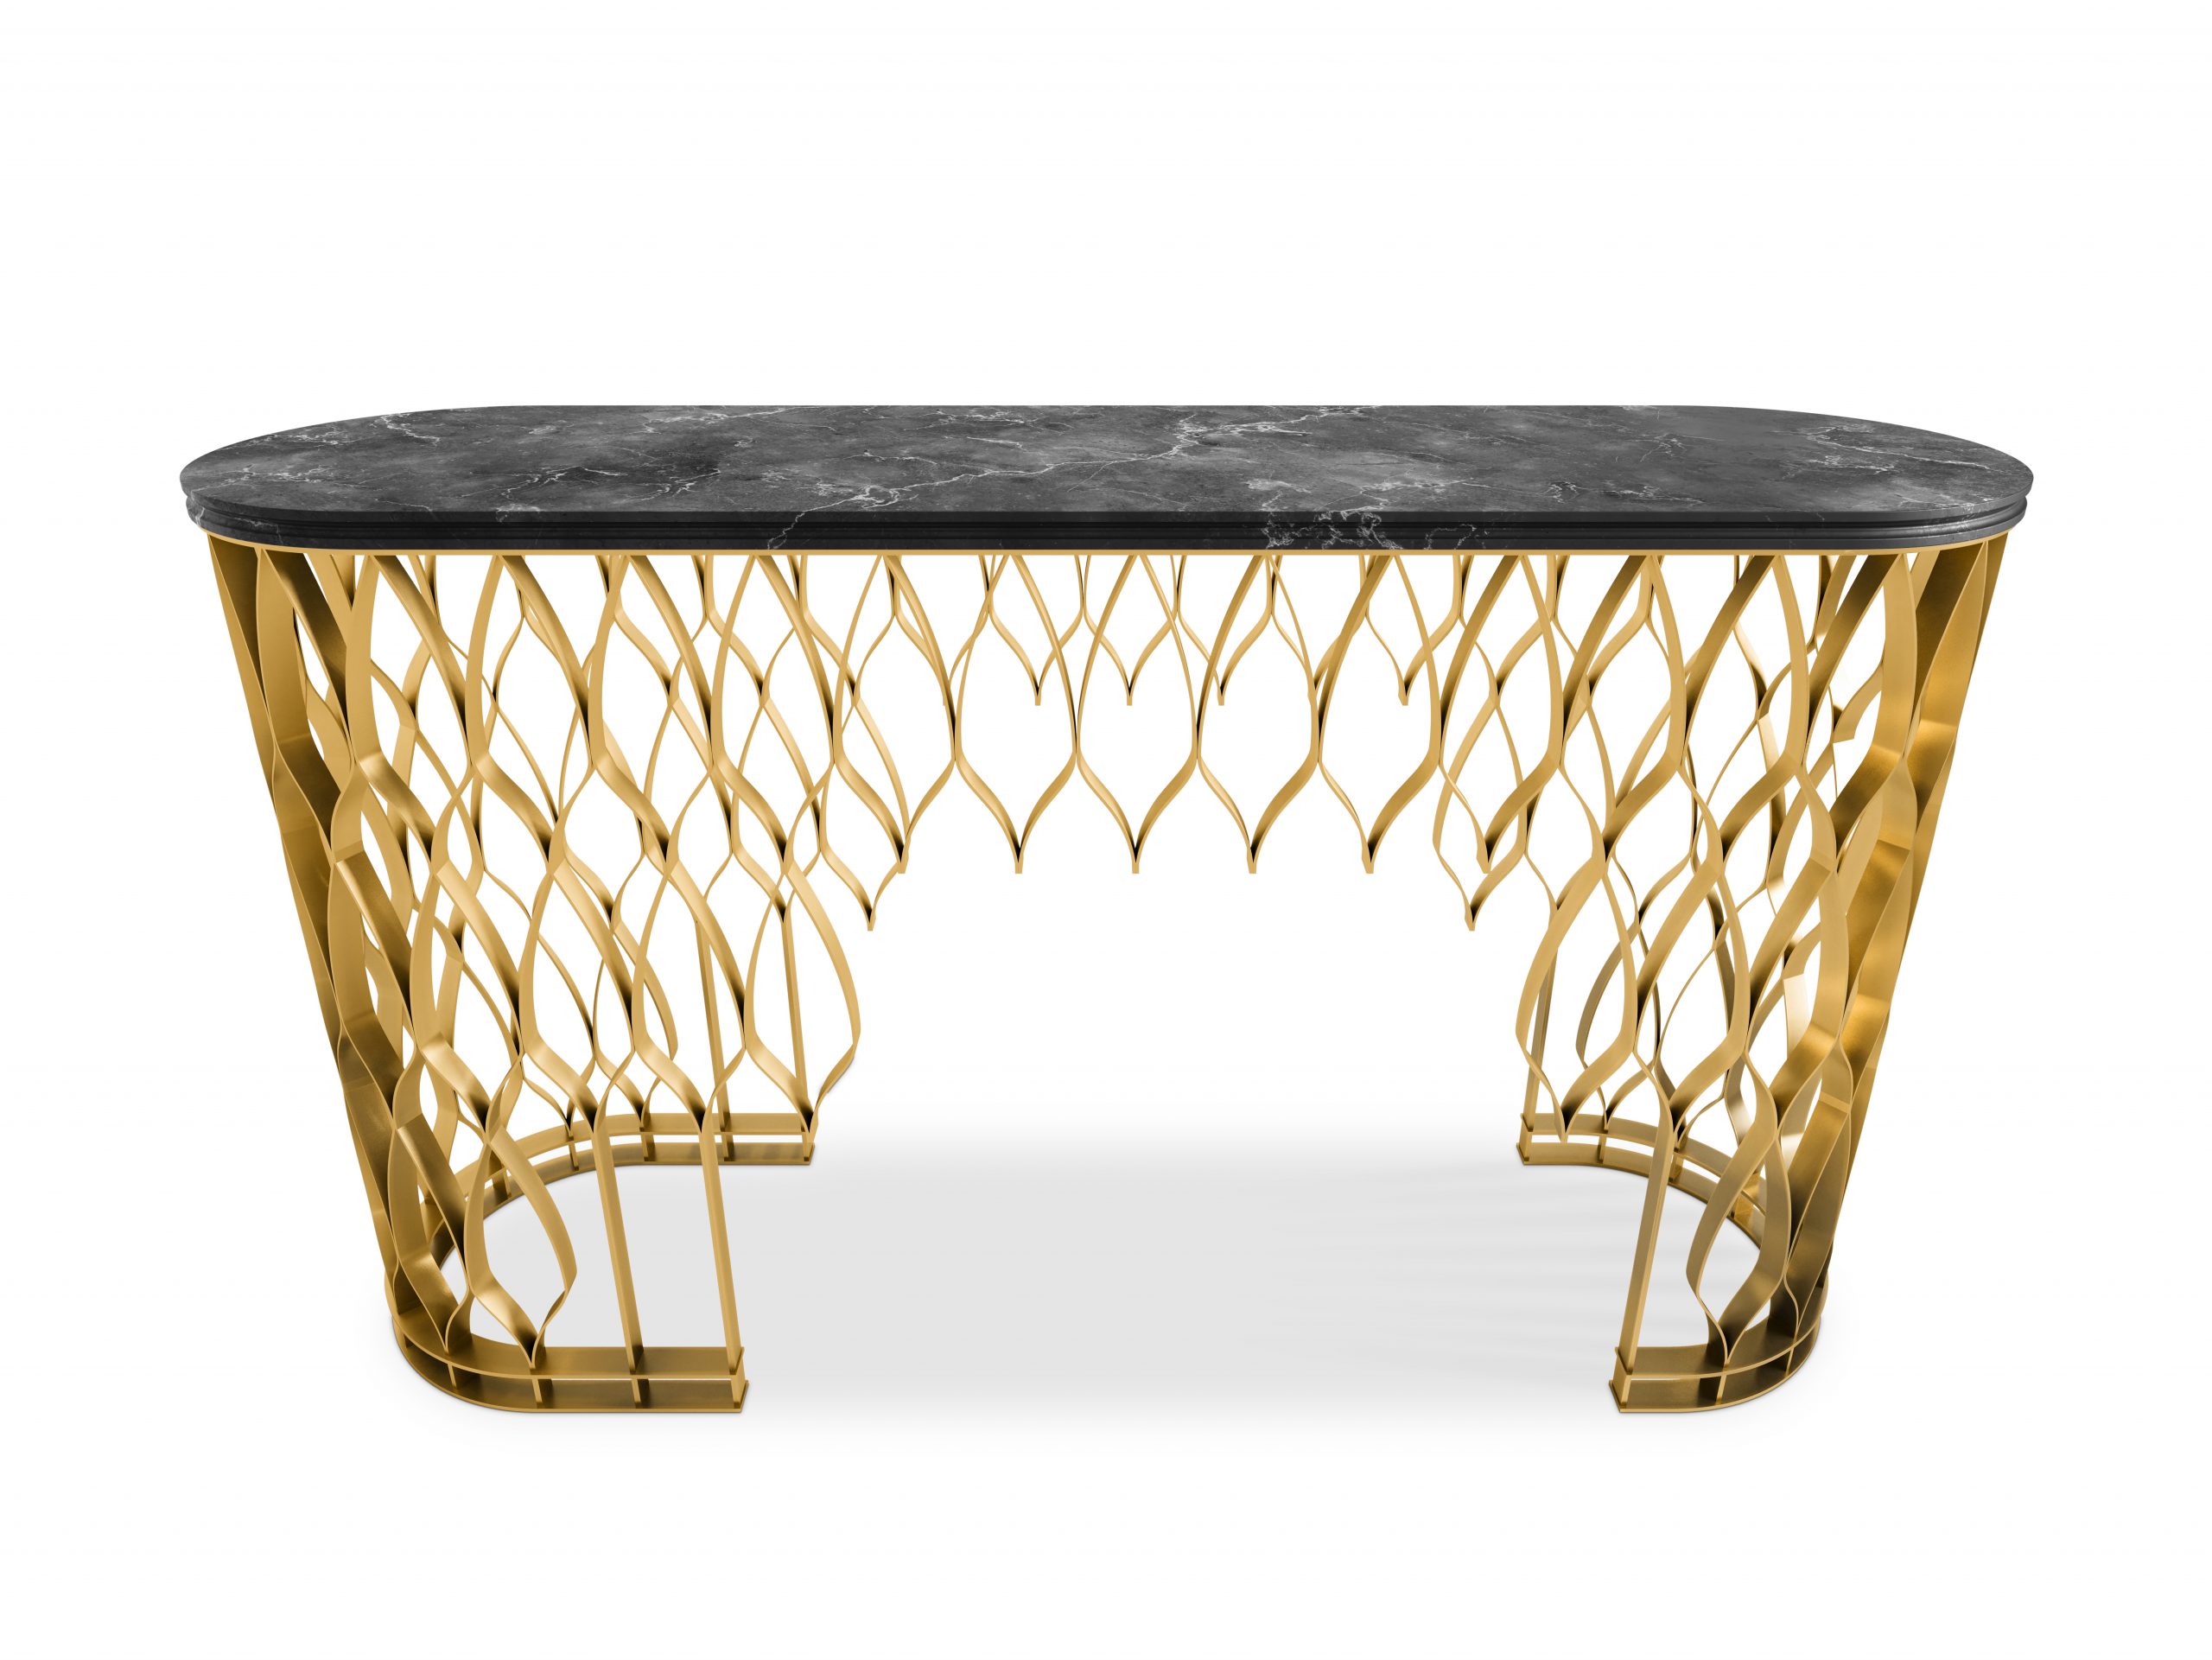 Salone del Mobile Spectacle: Mecca Console Steals the Show